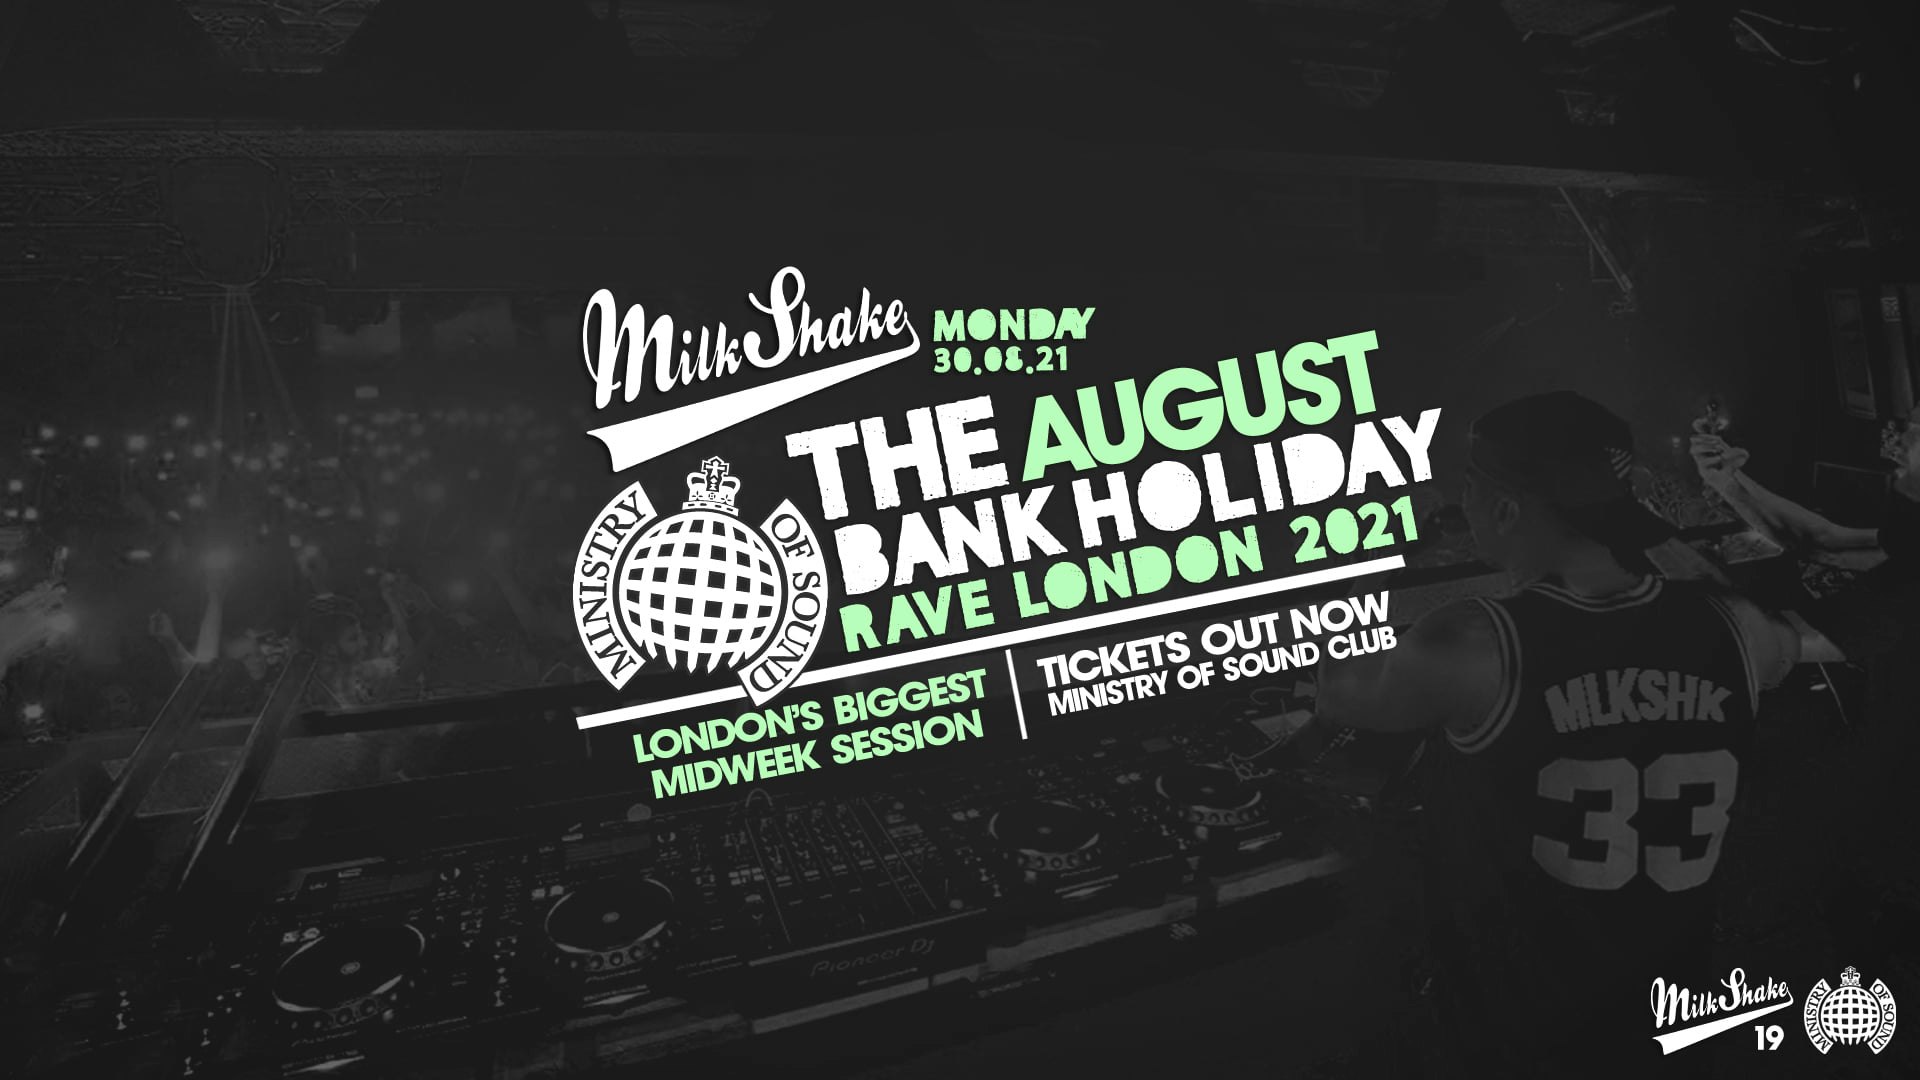 Ministry of Sound, Milkshake – The Bank Holiday Rave 2021 🔥 Monday Aug 30th : LIMITED TICKETS REMAIN!